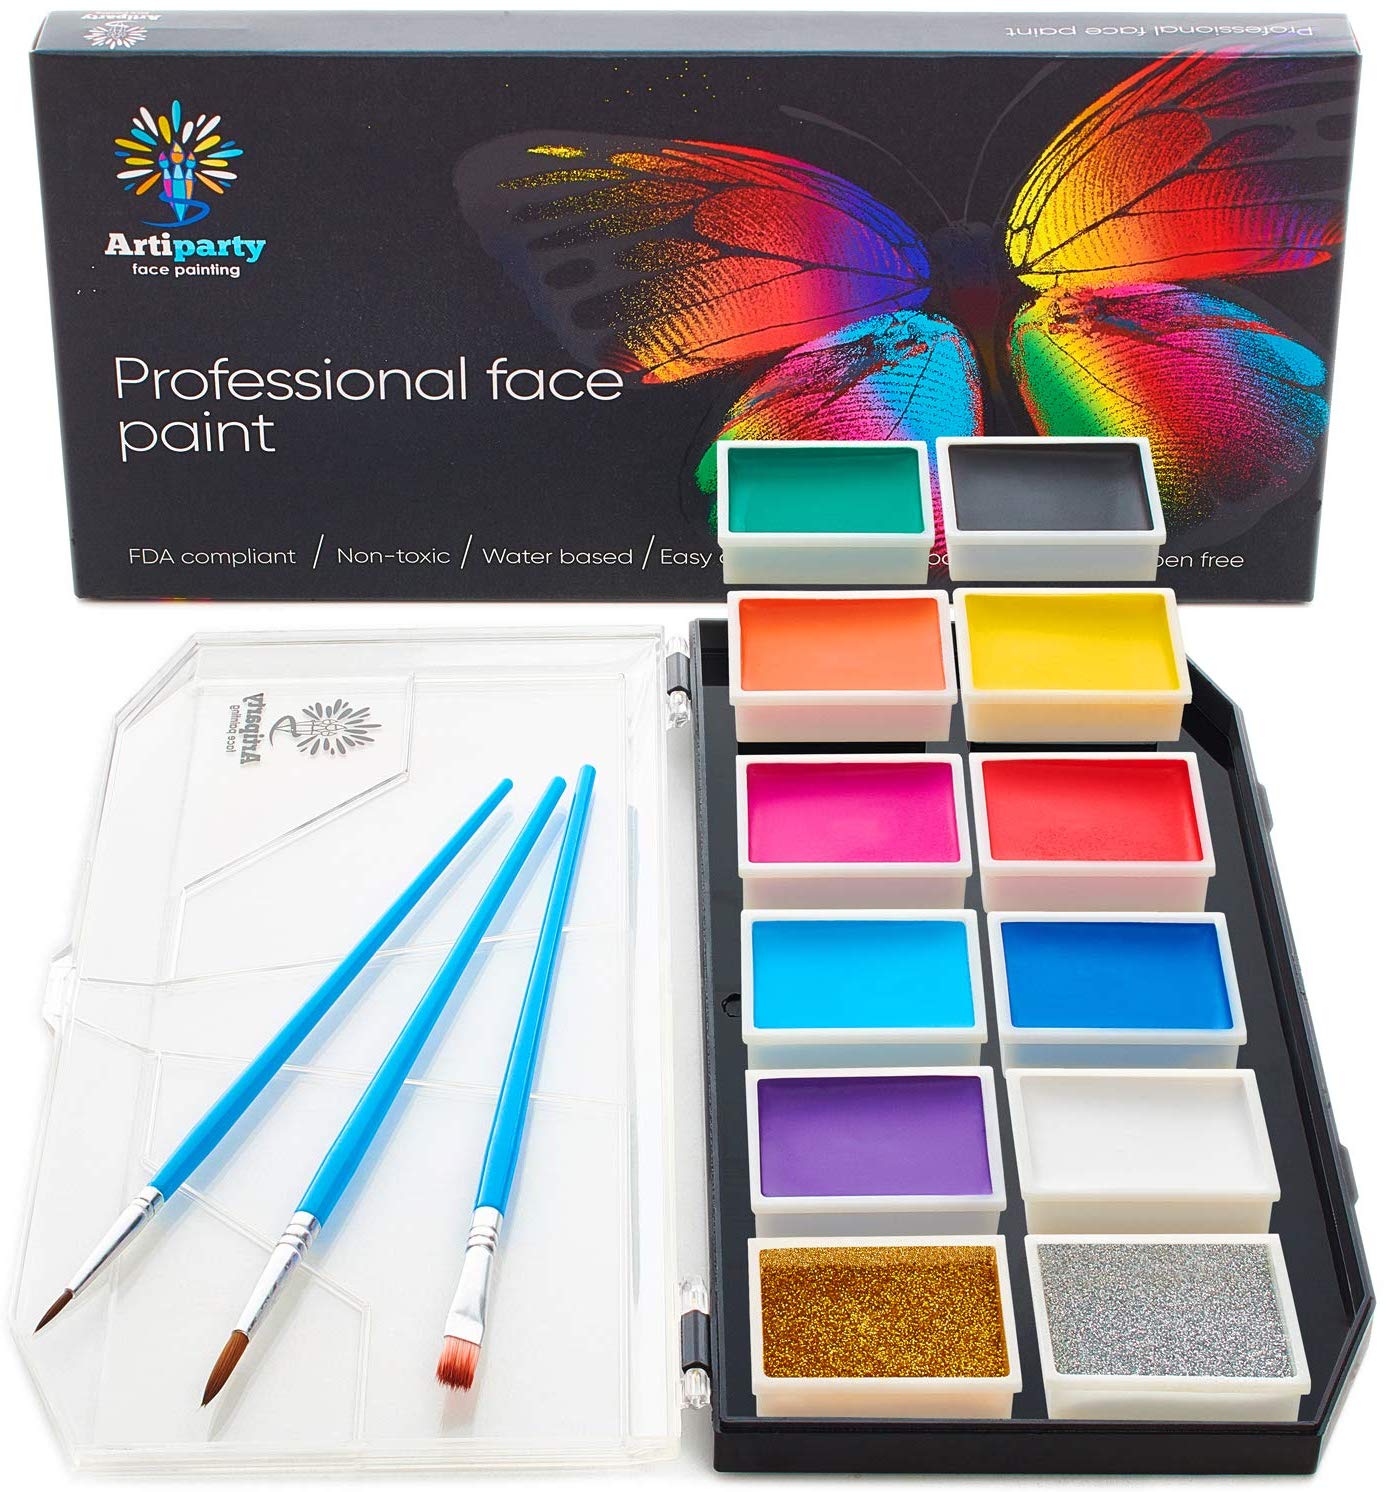 https://www.dontwasteyourmoney.com/wp-content/uploads/2019/10/artiparty-face-paint-kit-non-toxic-hypoallergenic-professional-face-painting-kit-for-kids-adults-cosplay-makeup-kit-easy-to-apply-remove-body-pa.jpg